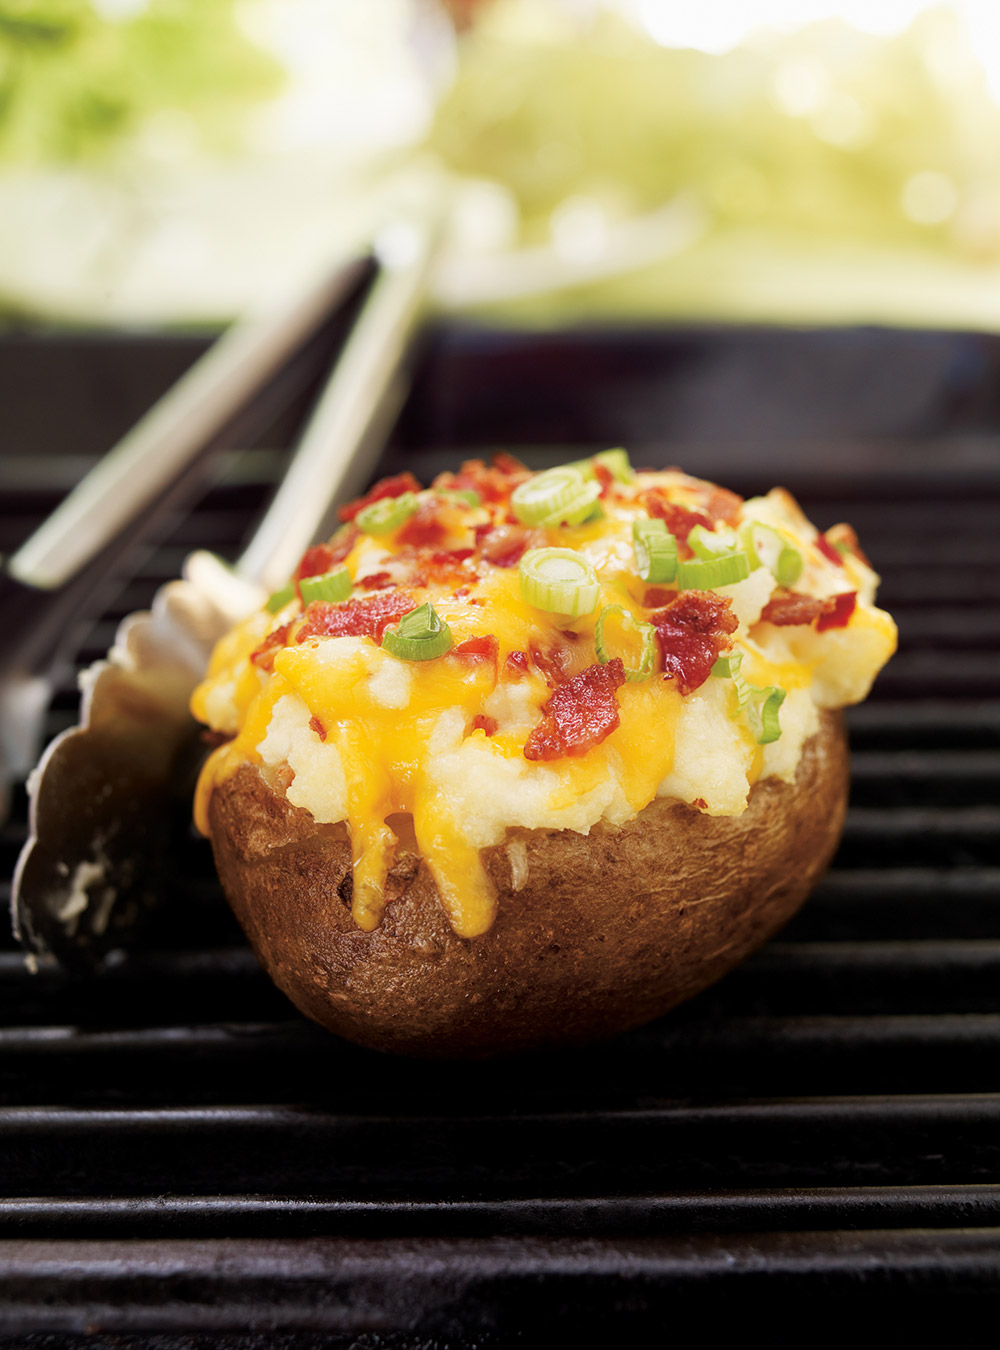 Fully-Loaded Baked Potatoes (The Best)